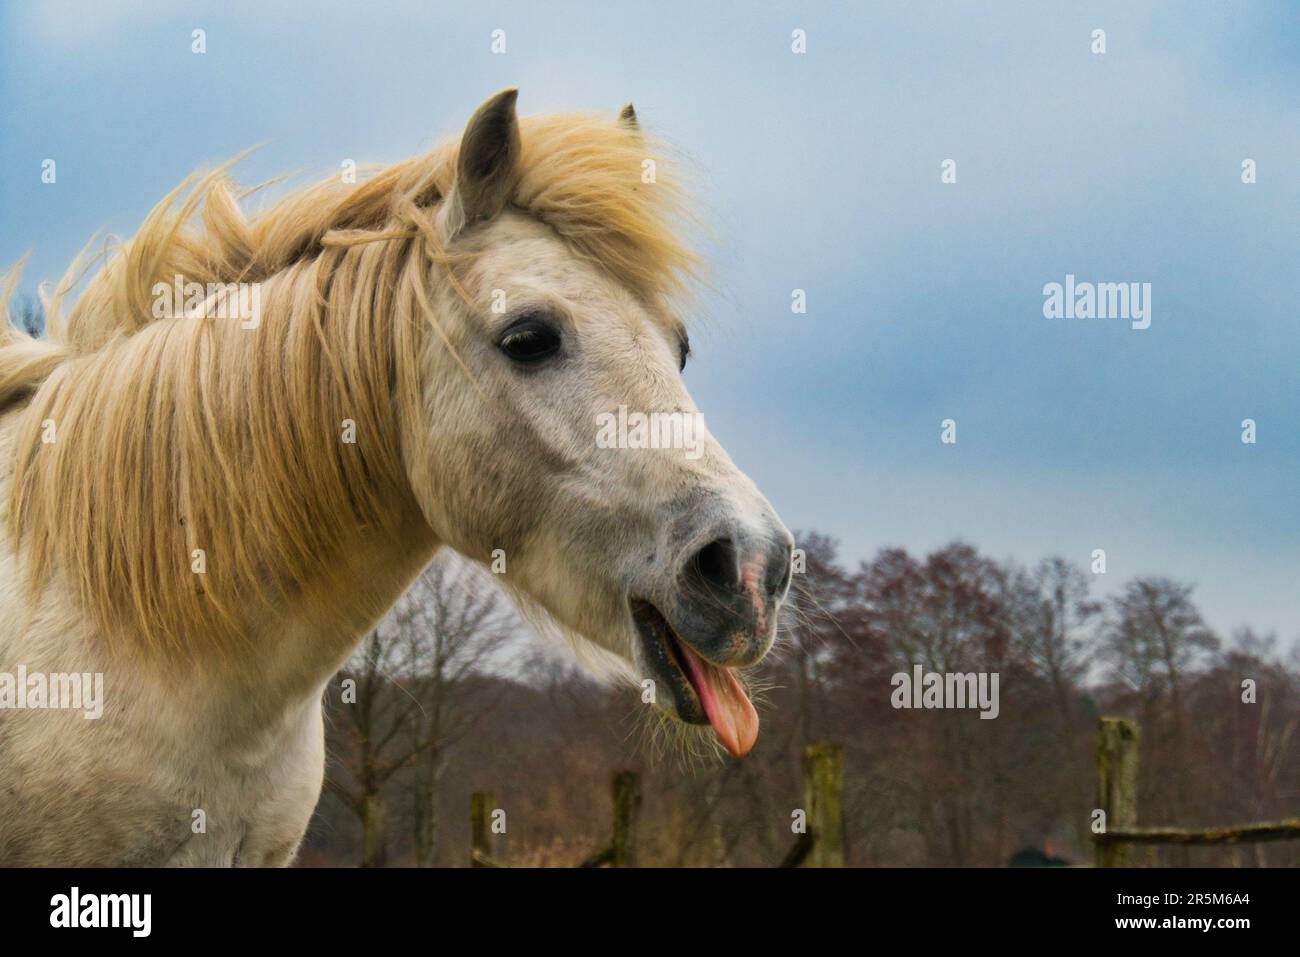 A horse sticks its tongue out of its mouth and looks very funny. Stock Photo